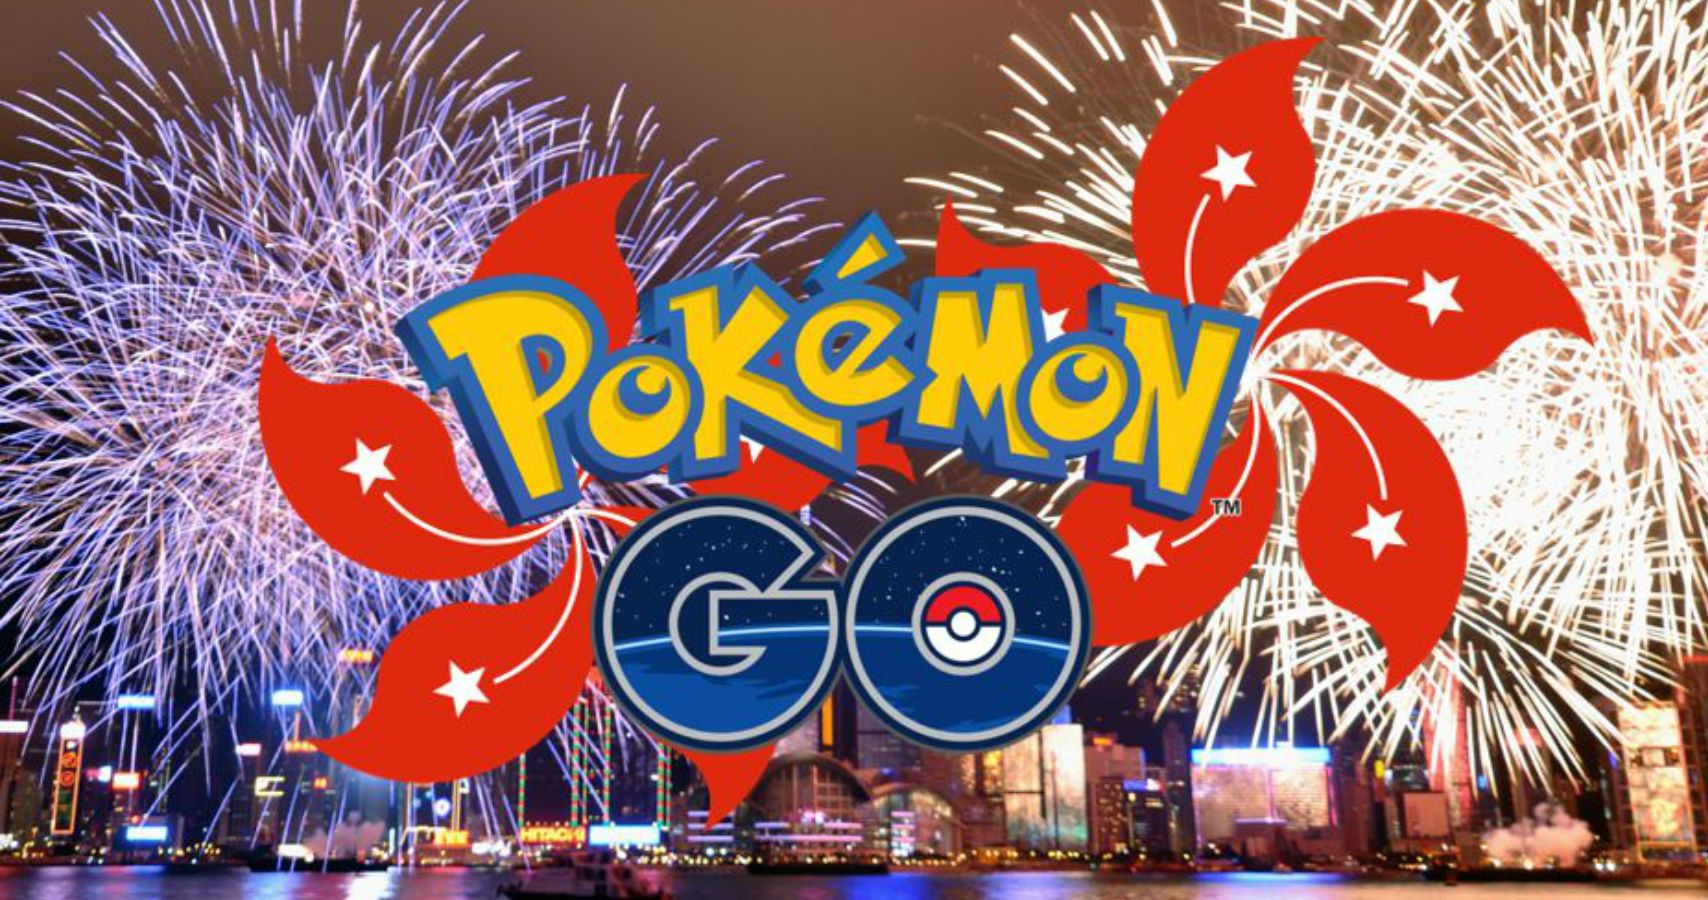 Hong Kong Protestors Are Using Pokémon GO To Form Groups And Avoid Police